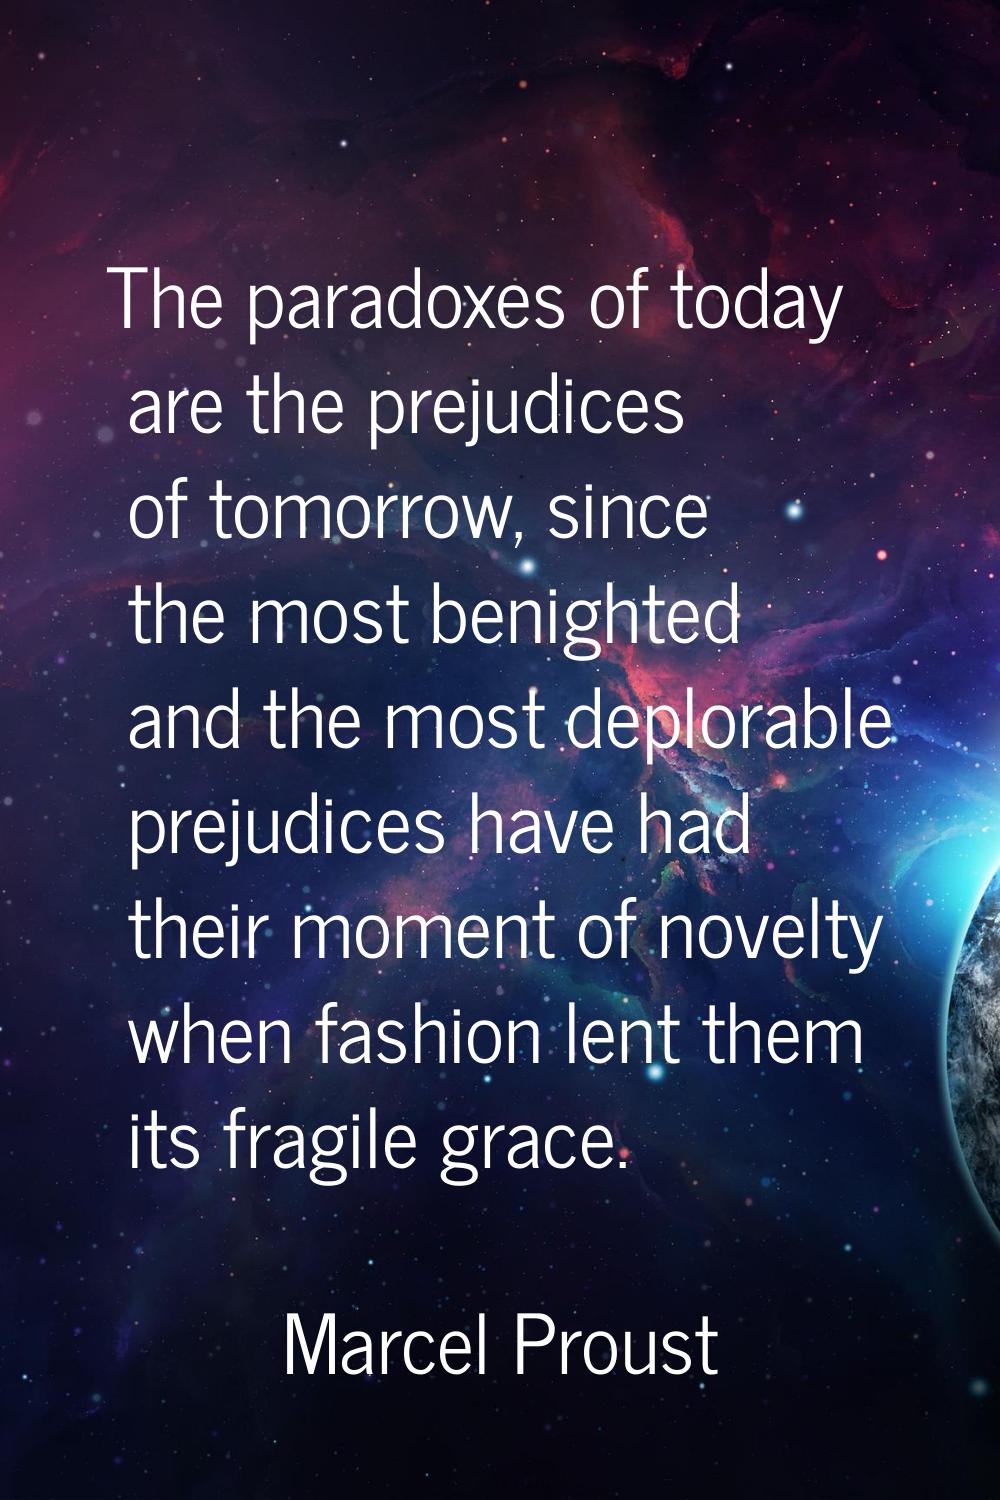 The paradoxes of today are the prejudices of tomorrow, since the most benighted and the most deplor